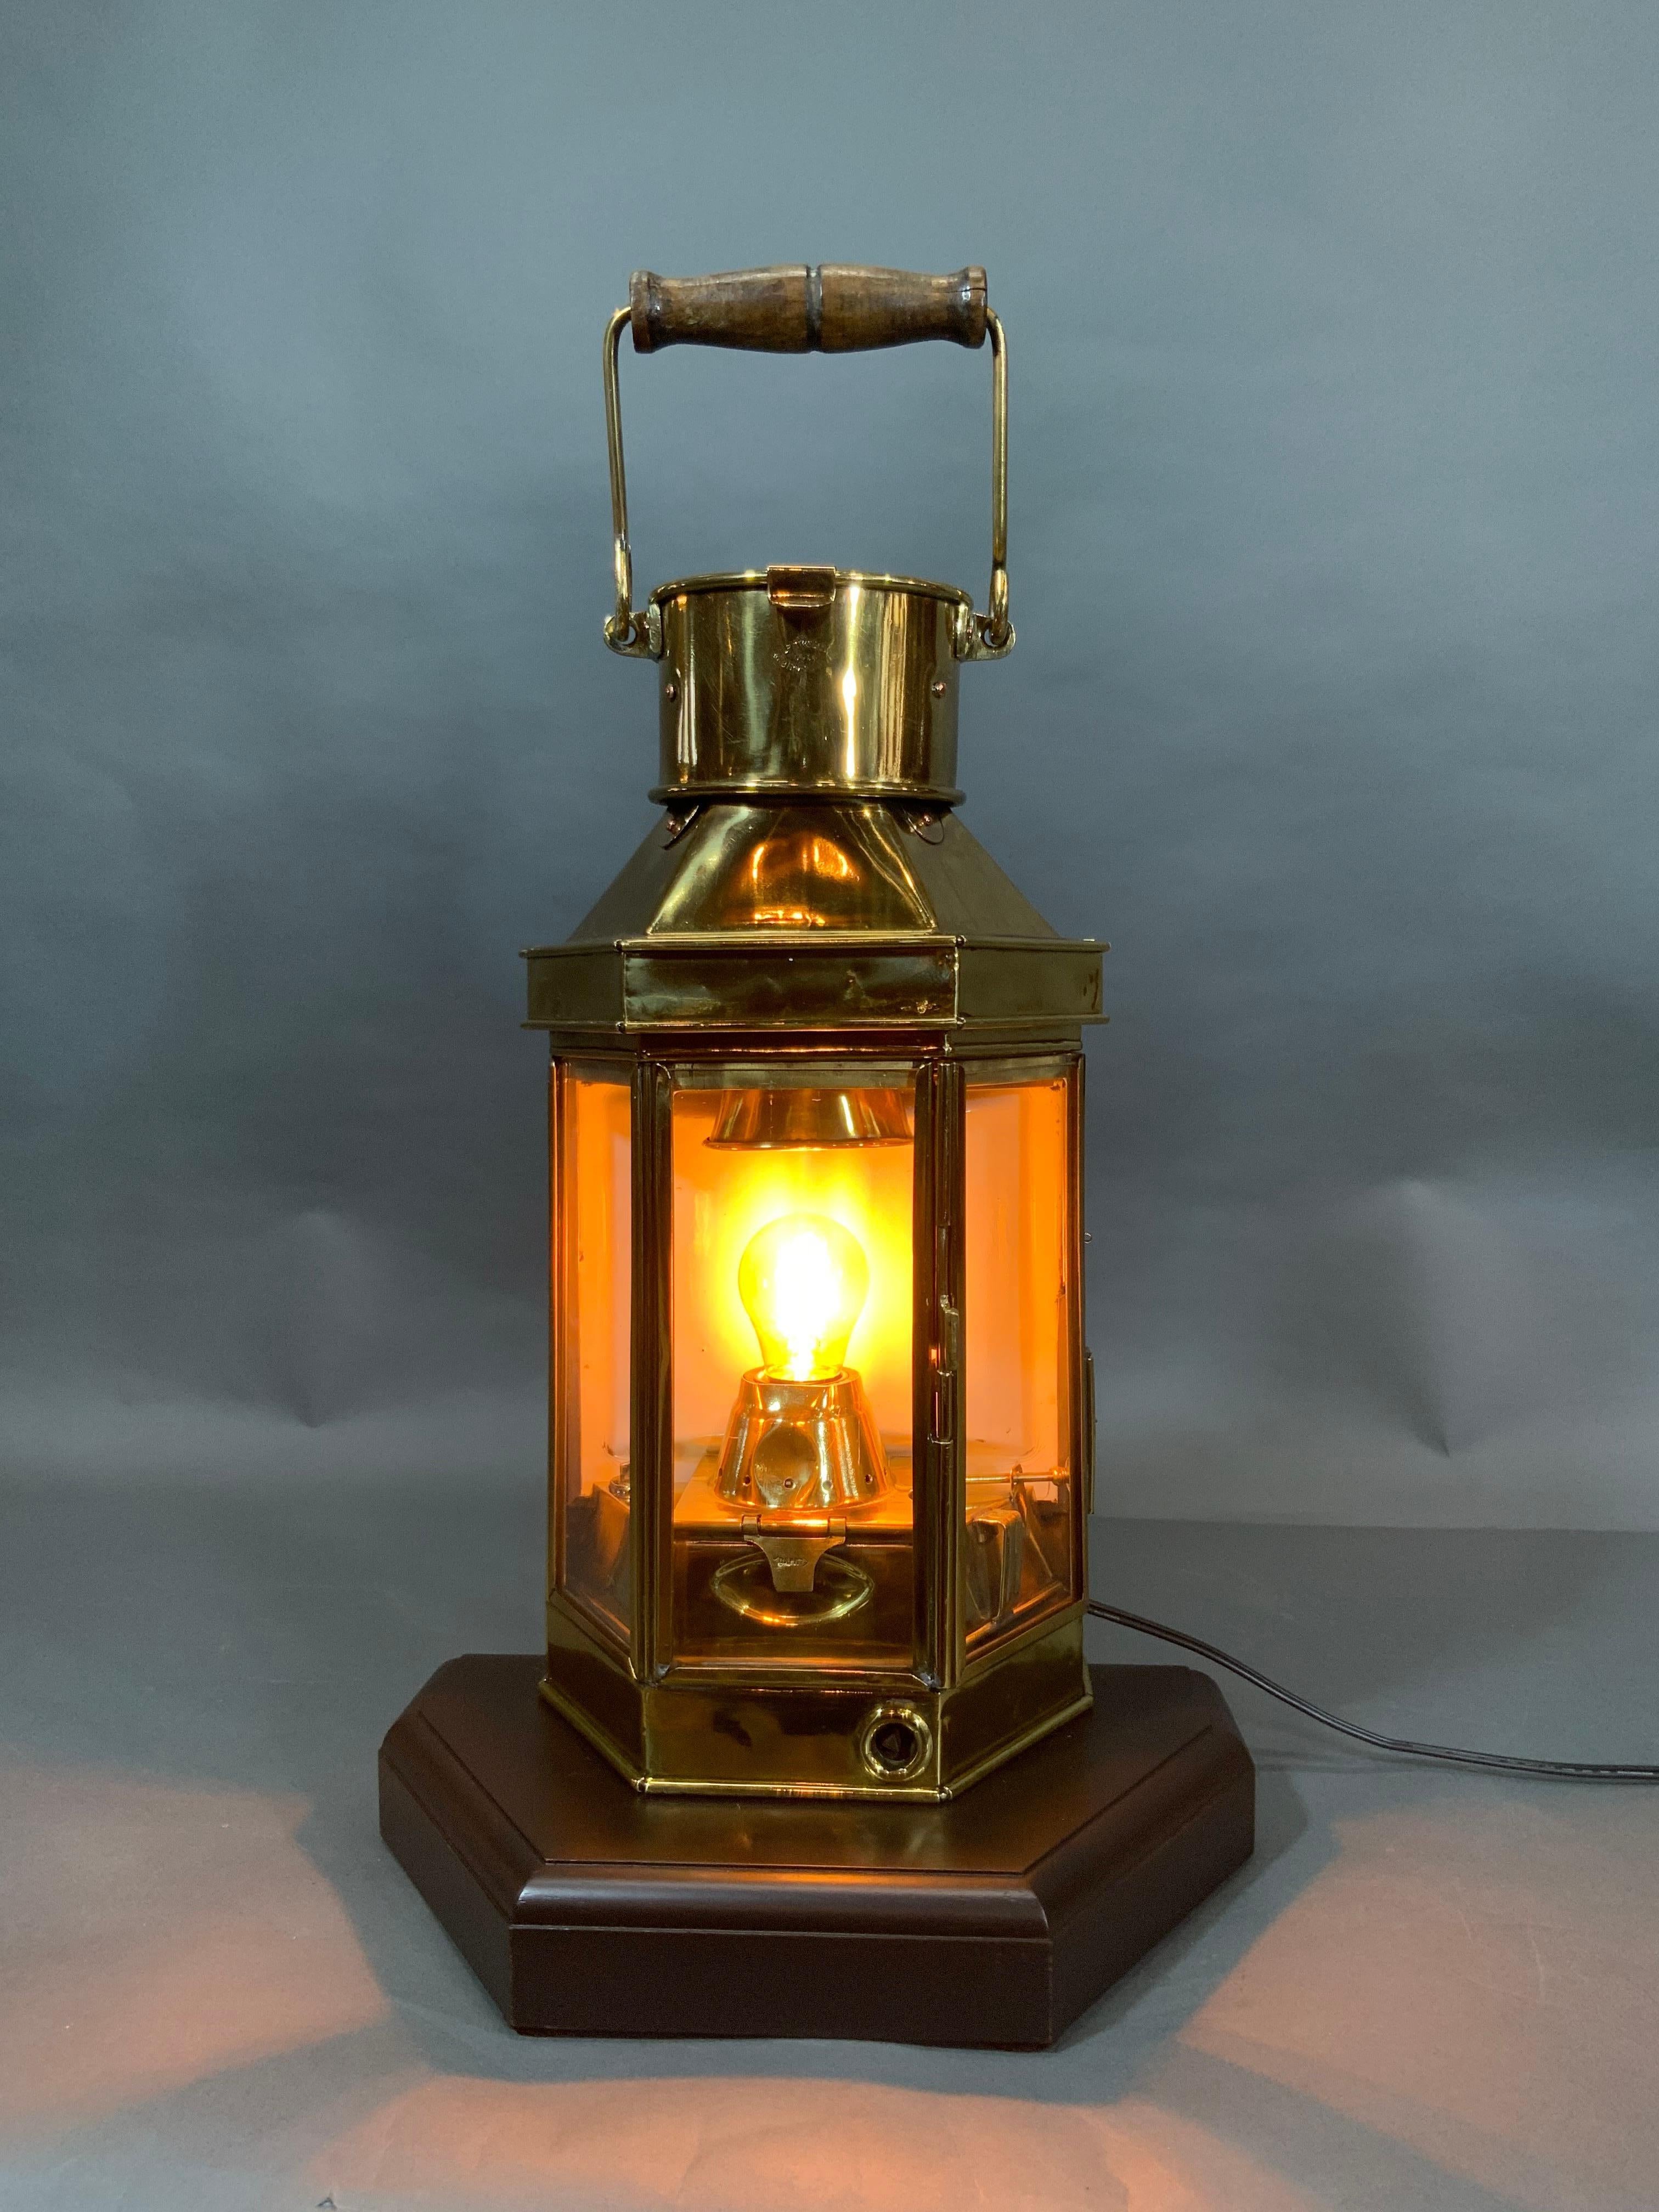 Solid brass cabin lantern by Bulpitt of Birmingham England dated 1914 with engraving. This lantern is quite similar to what was on the Titanic and the great White Star Liner of the day in the cabins. This is a relic of the past. With three glass